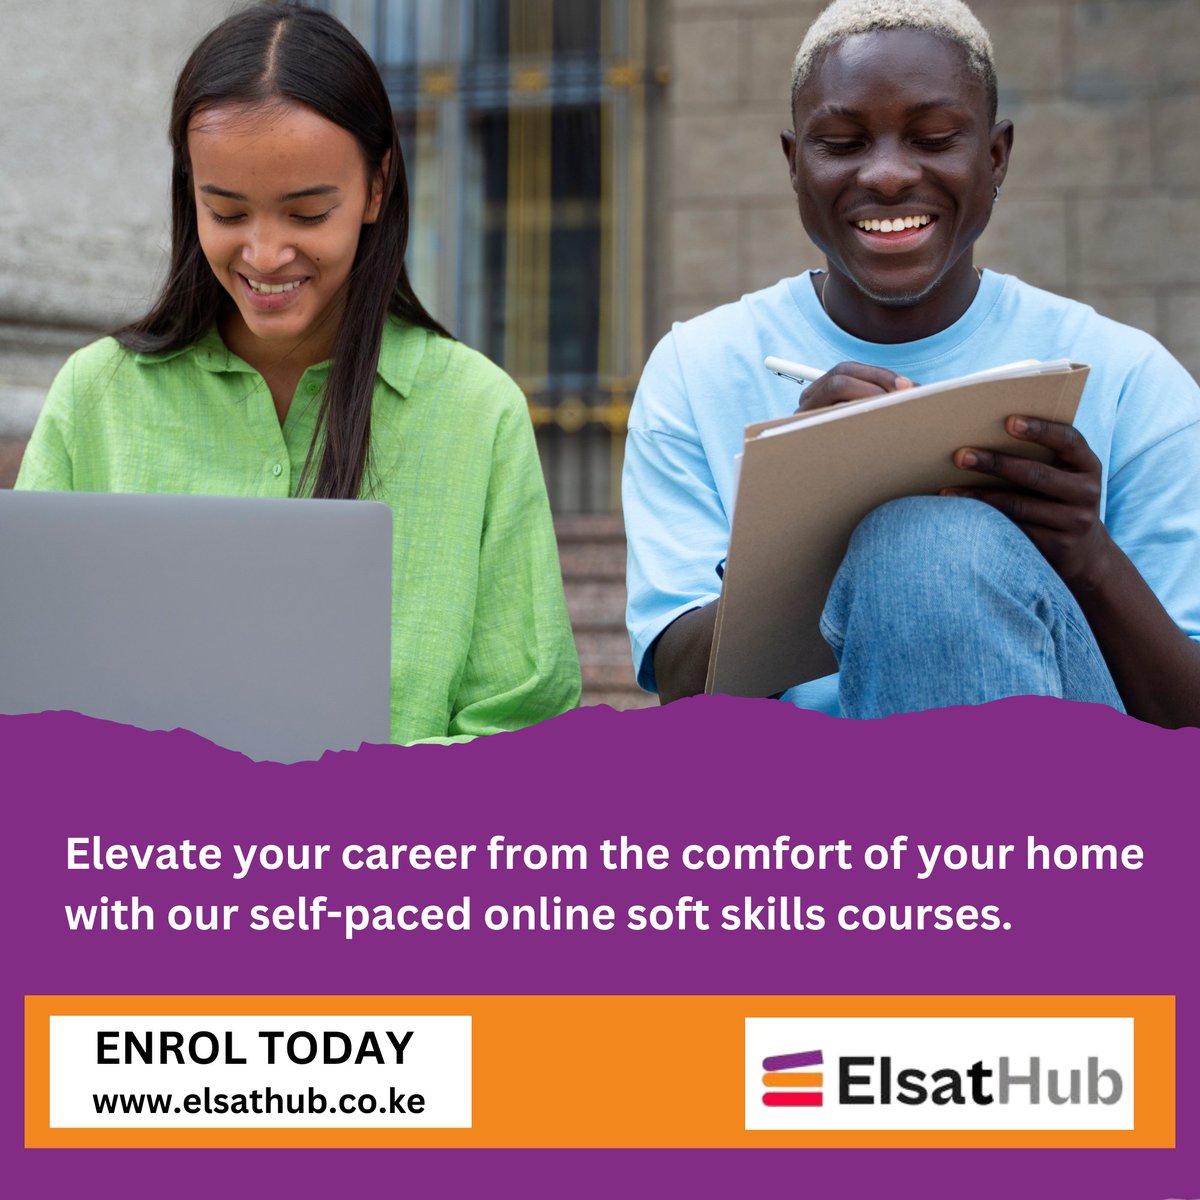 EQ is the new IQ! explore the importance of emotional intelligence in #leadership and building strong relationships with Elsat Hub soft skills. Enrol today at elsathub.co.ke. Contact us at:  elsat@elearningsolutions.co.ke or call 254 0110006964.#ELSATHub #onlinelearning